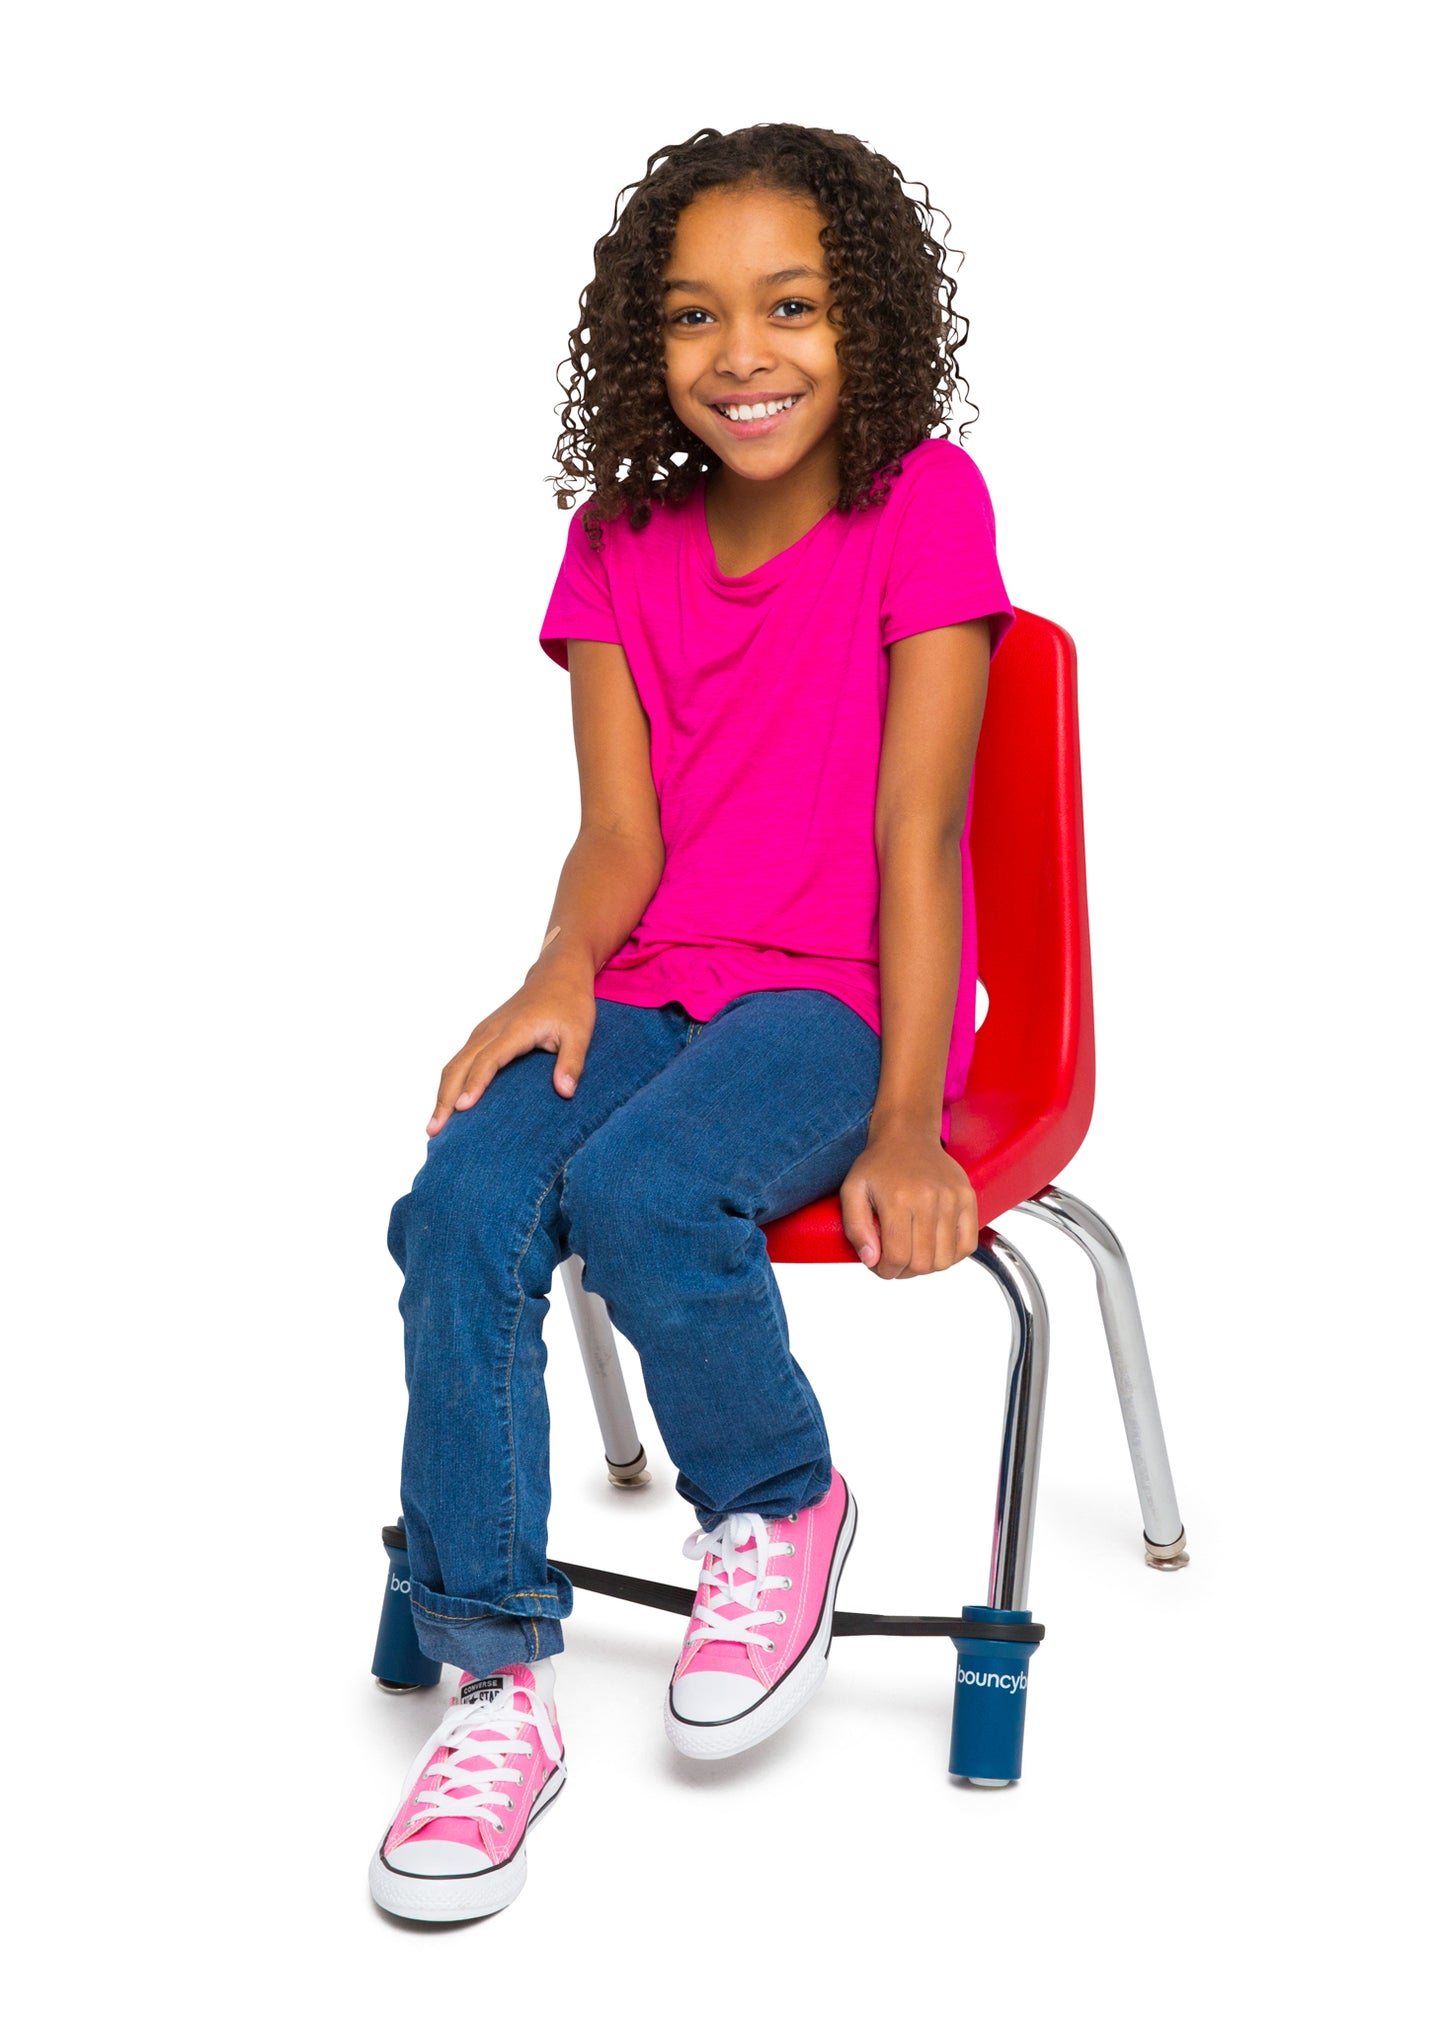 Bouncyband for Elementary School Chairs - Black